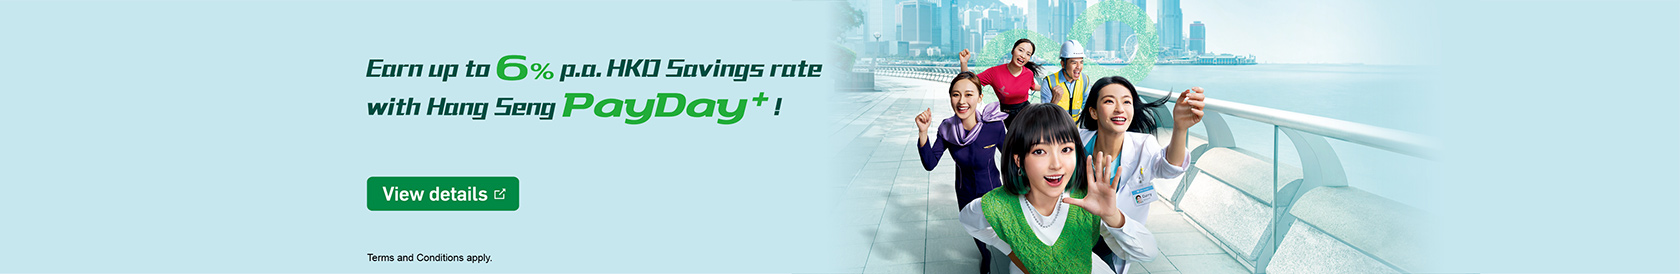 Earn up to 6% p.a. HKD Savings rate with Hang Seng PayDay+!